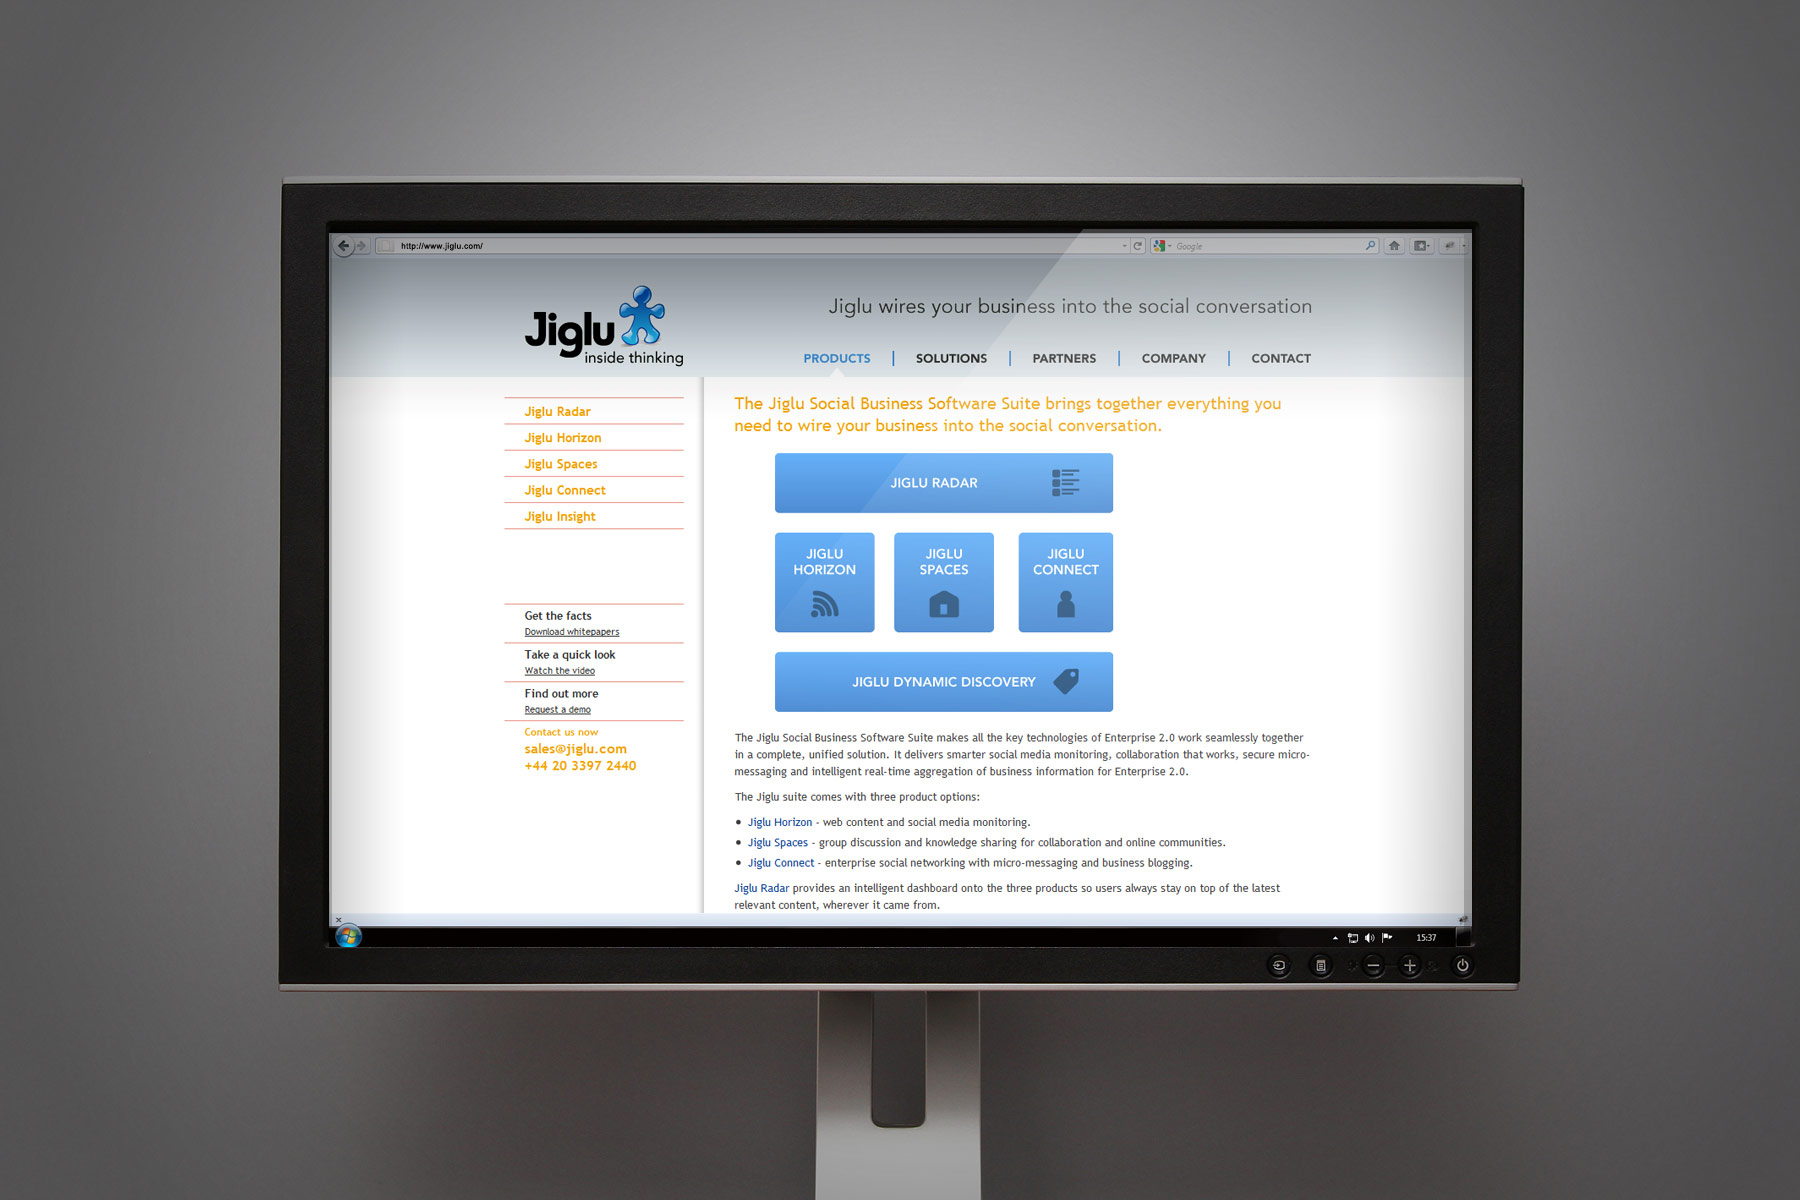 We worked together with the client on providing a web toolkit where we covered off the required visual assets.